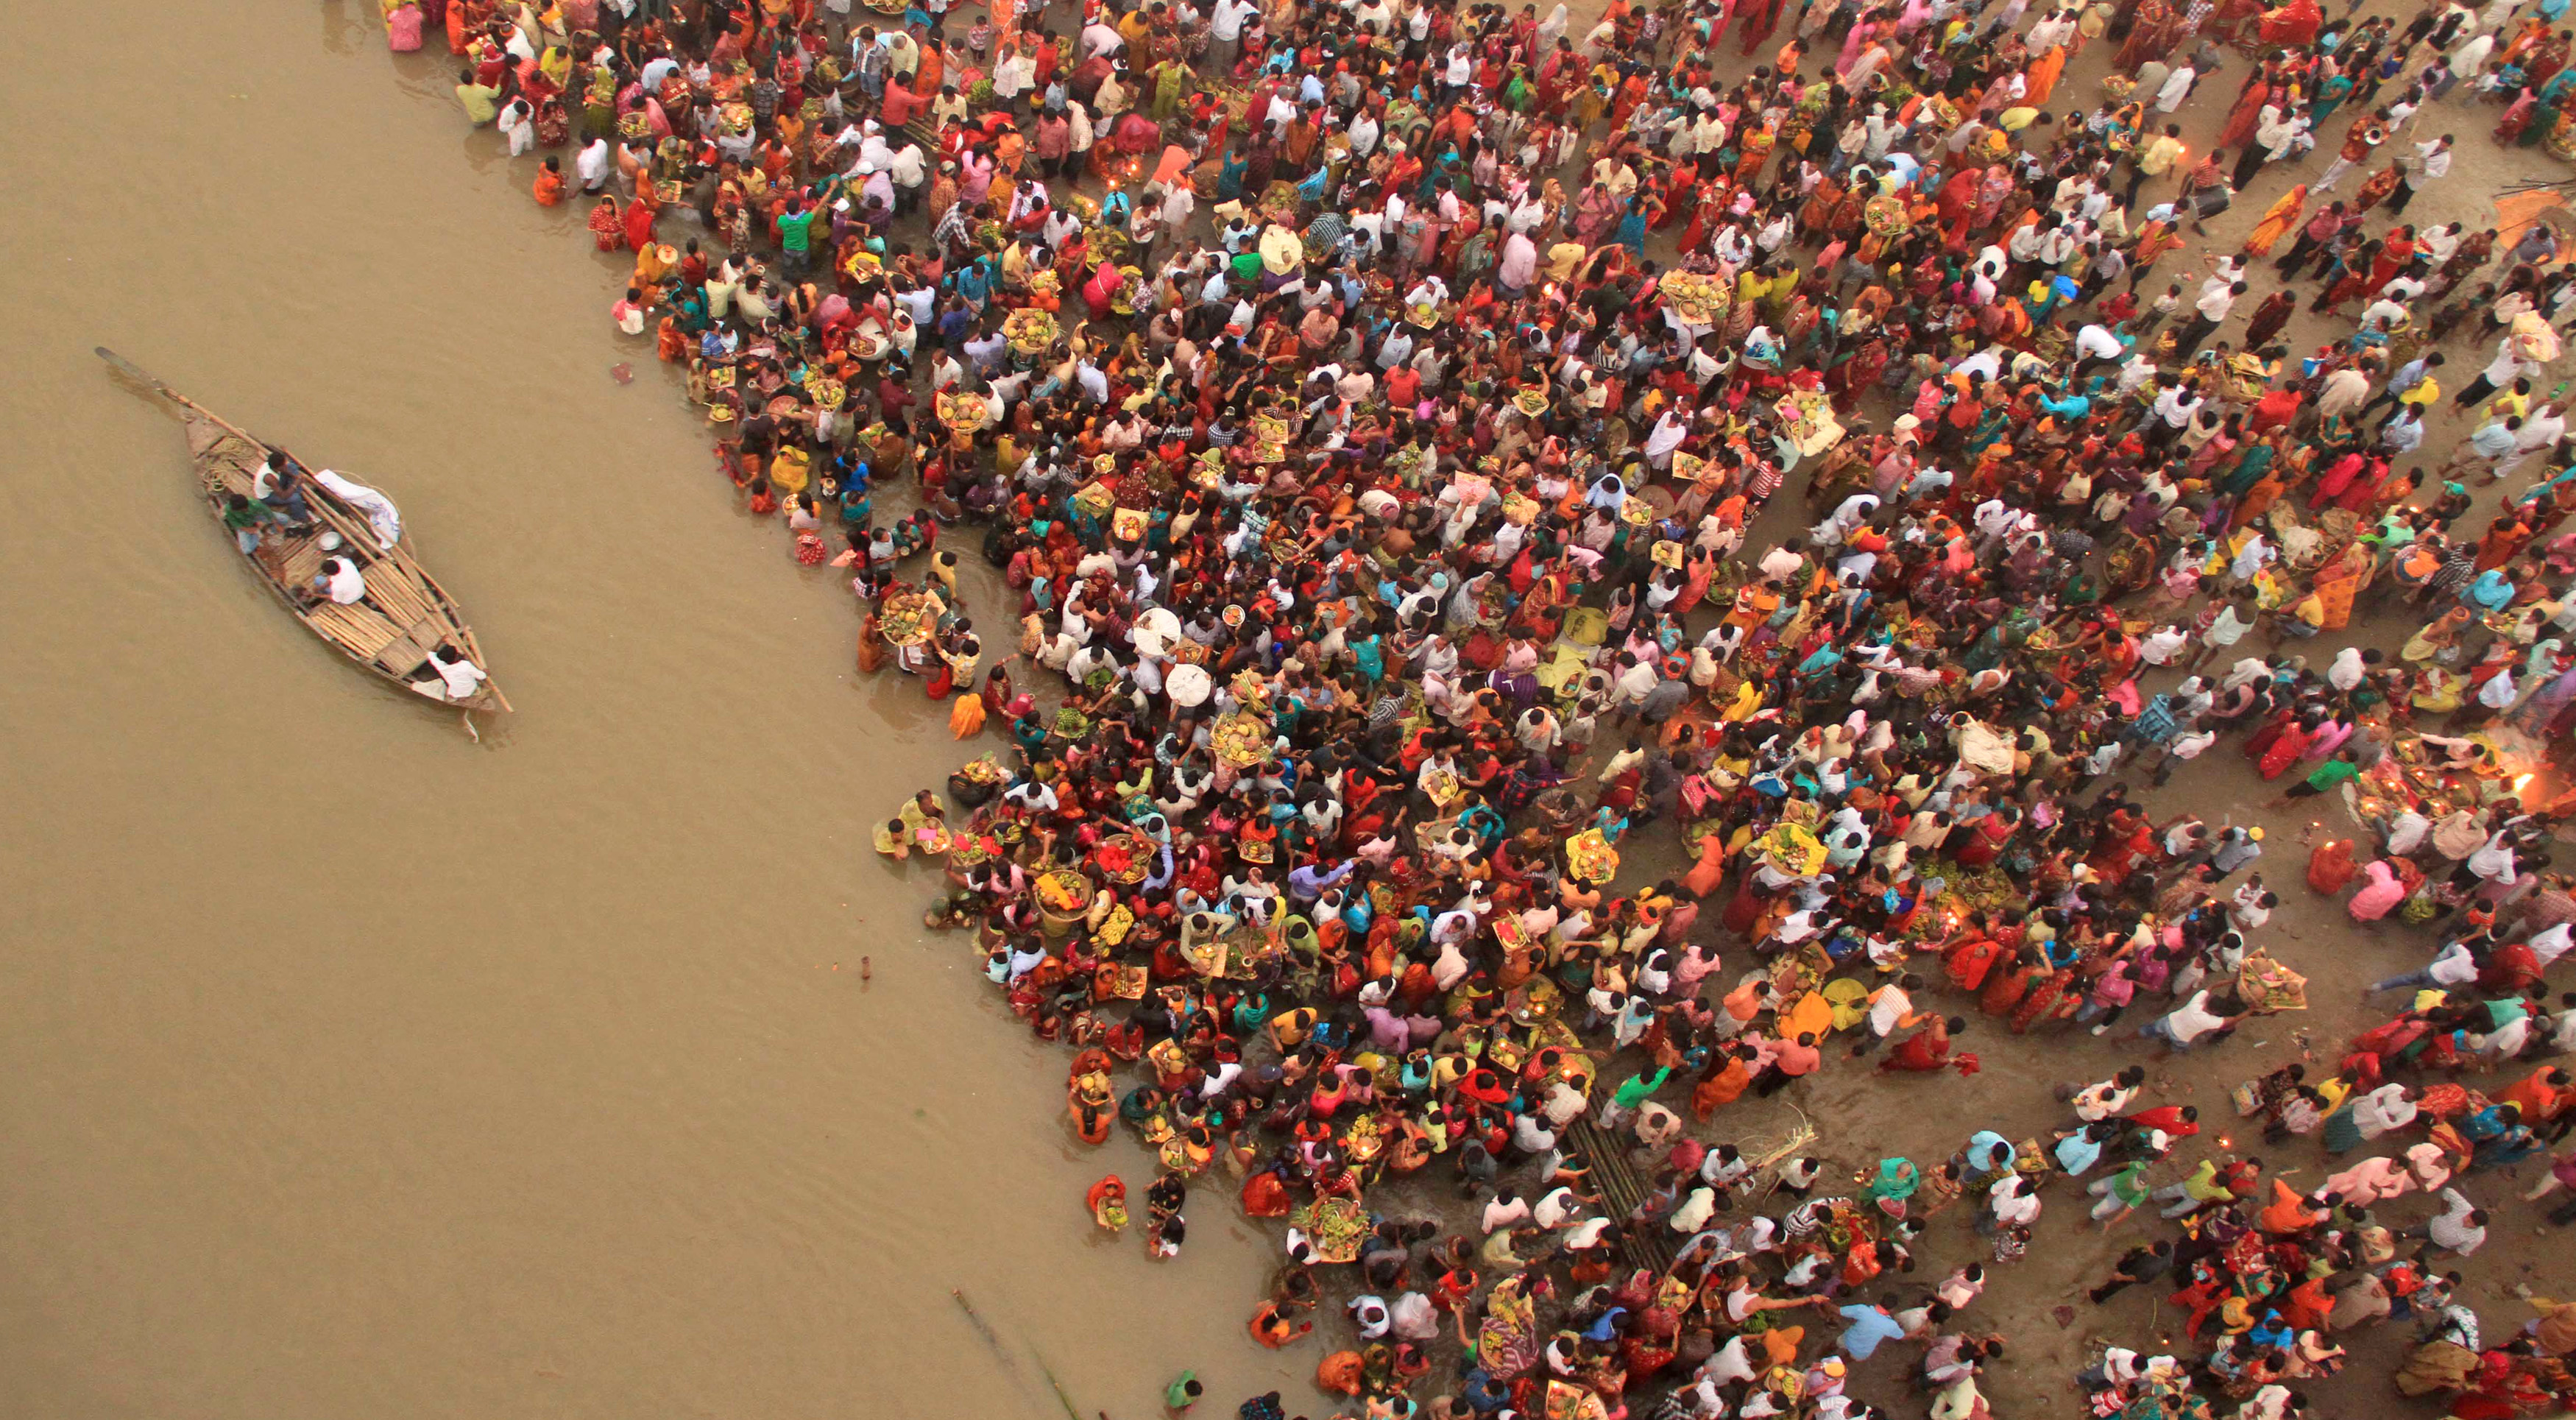 Hindu devotees gather to worship in the river Ganges in Patna, India.